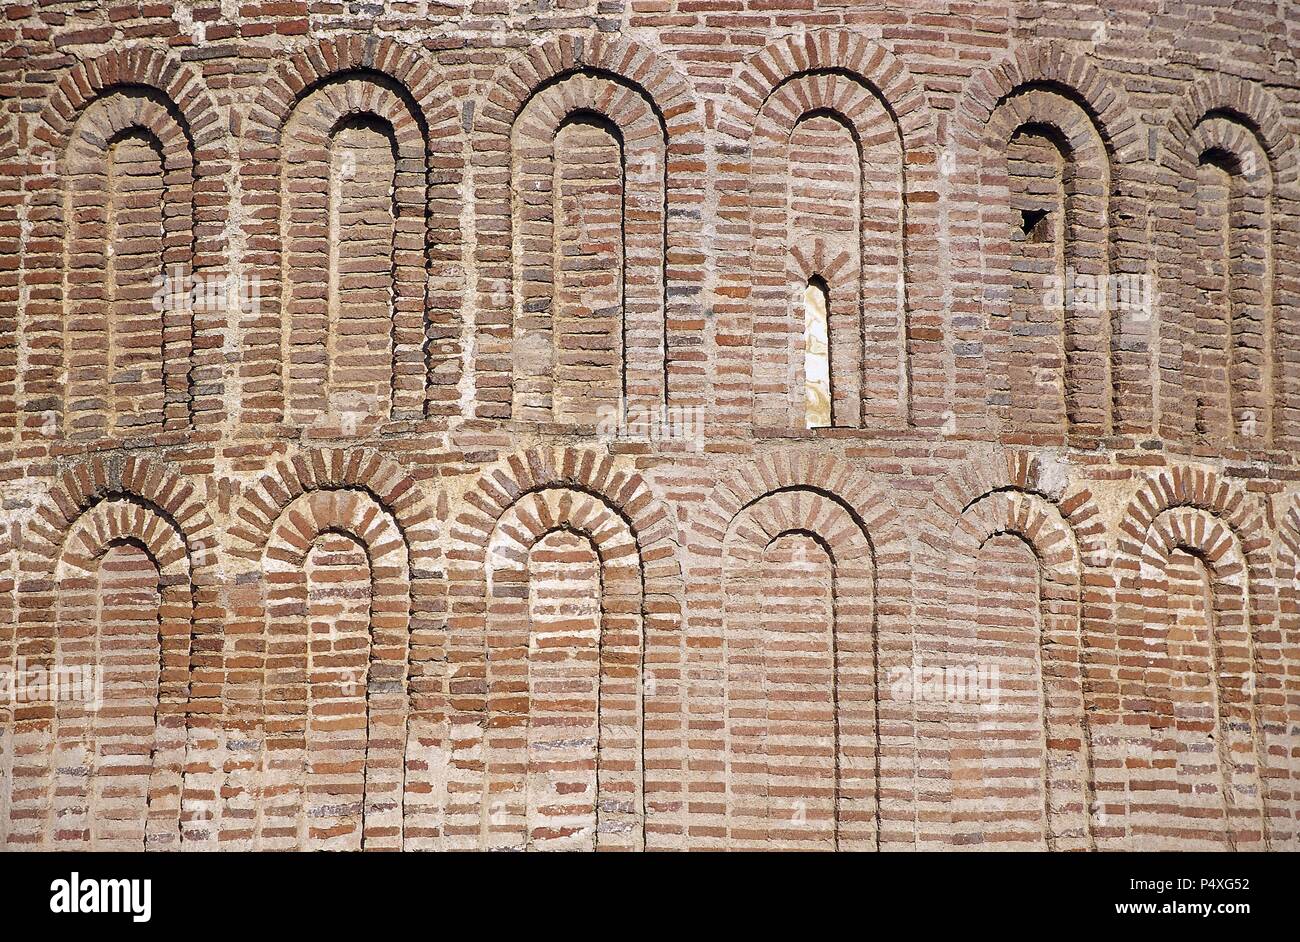 Church of the Assumption of our Lady. Detail of the apse. Mudejar Romanesque style built in the thirteenth century. Cubillo de Uceda. Guadalajara province. Castile-La Mancha. Spain. Stock Photo